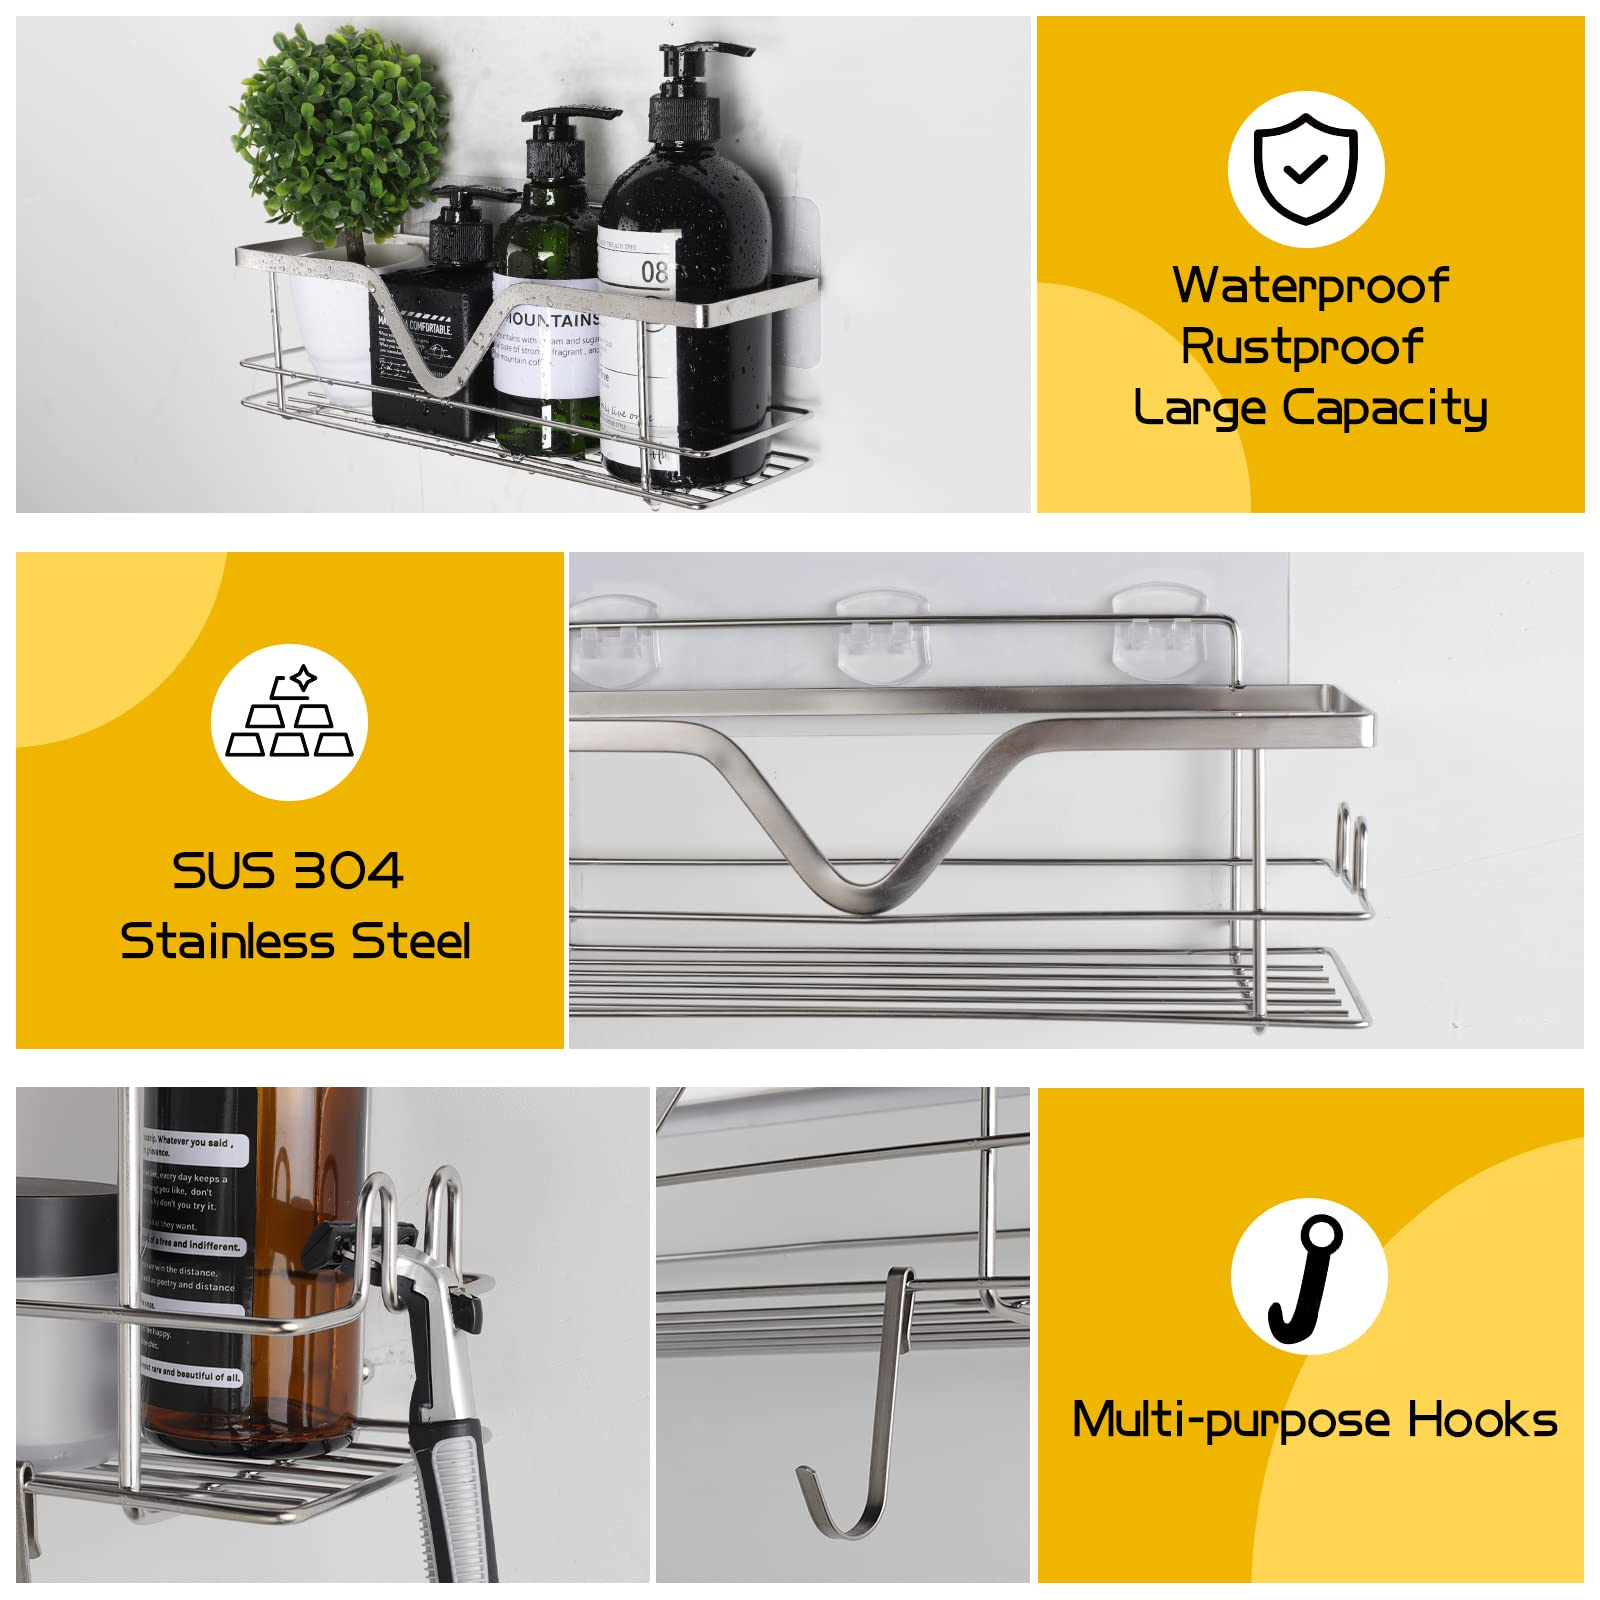 3Free 6 Pack Shower Caddy, Strong Adhesive Shower Organizer with Soap  Holders No Drilling Shower Shelves, Rustproof SUS304 Stainless Steel  Bathroom